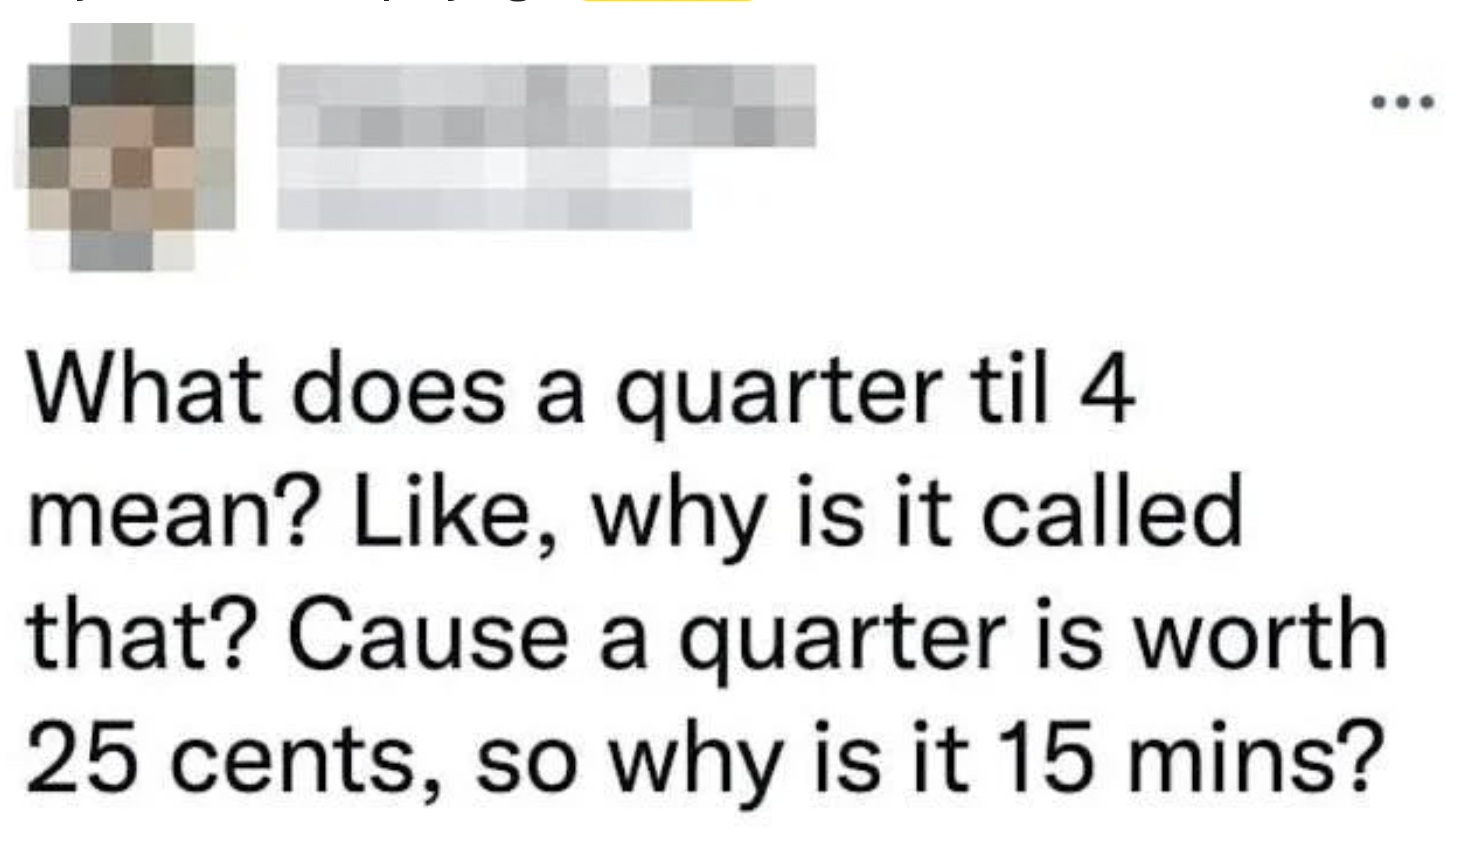 handwriting - What does a quarter til 4 mean? , why is it called that? Cause a quarter is worth 25 cents, so why is it 15 mins?